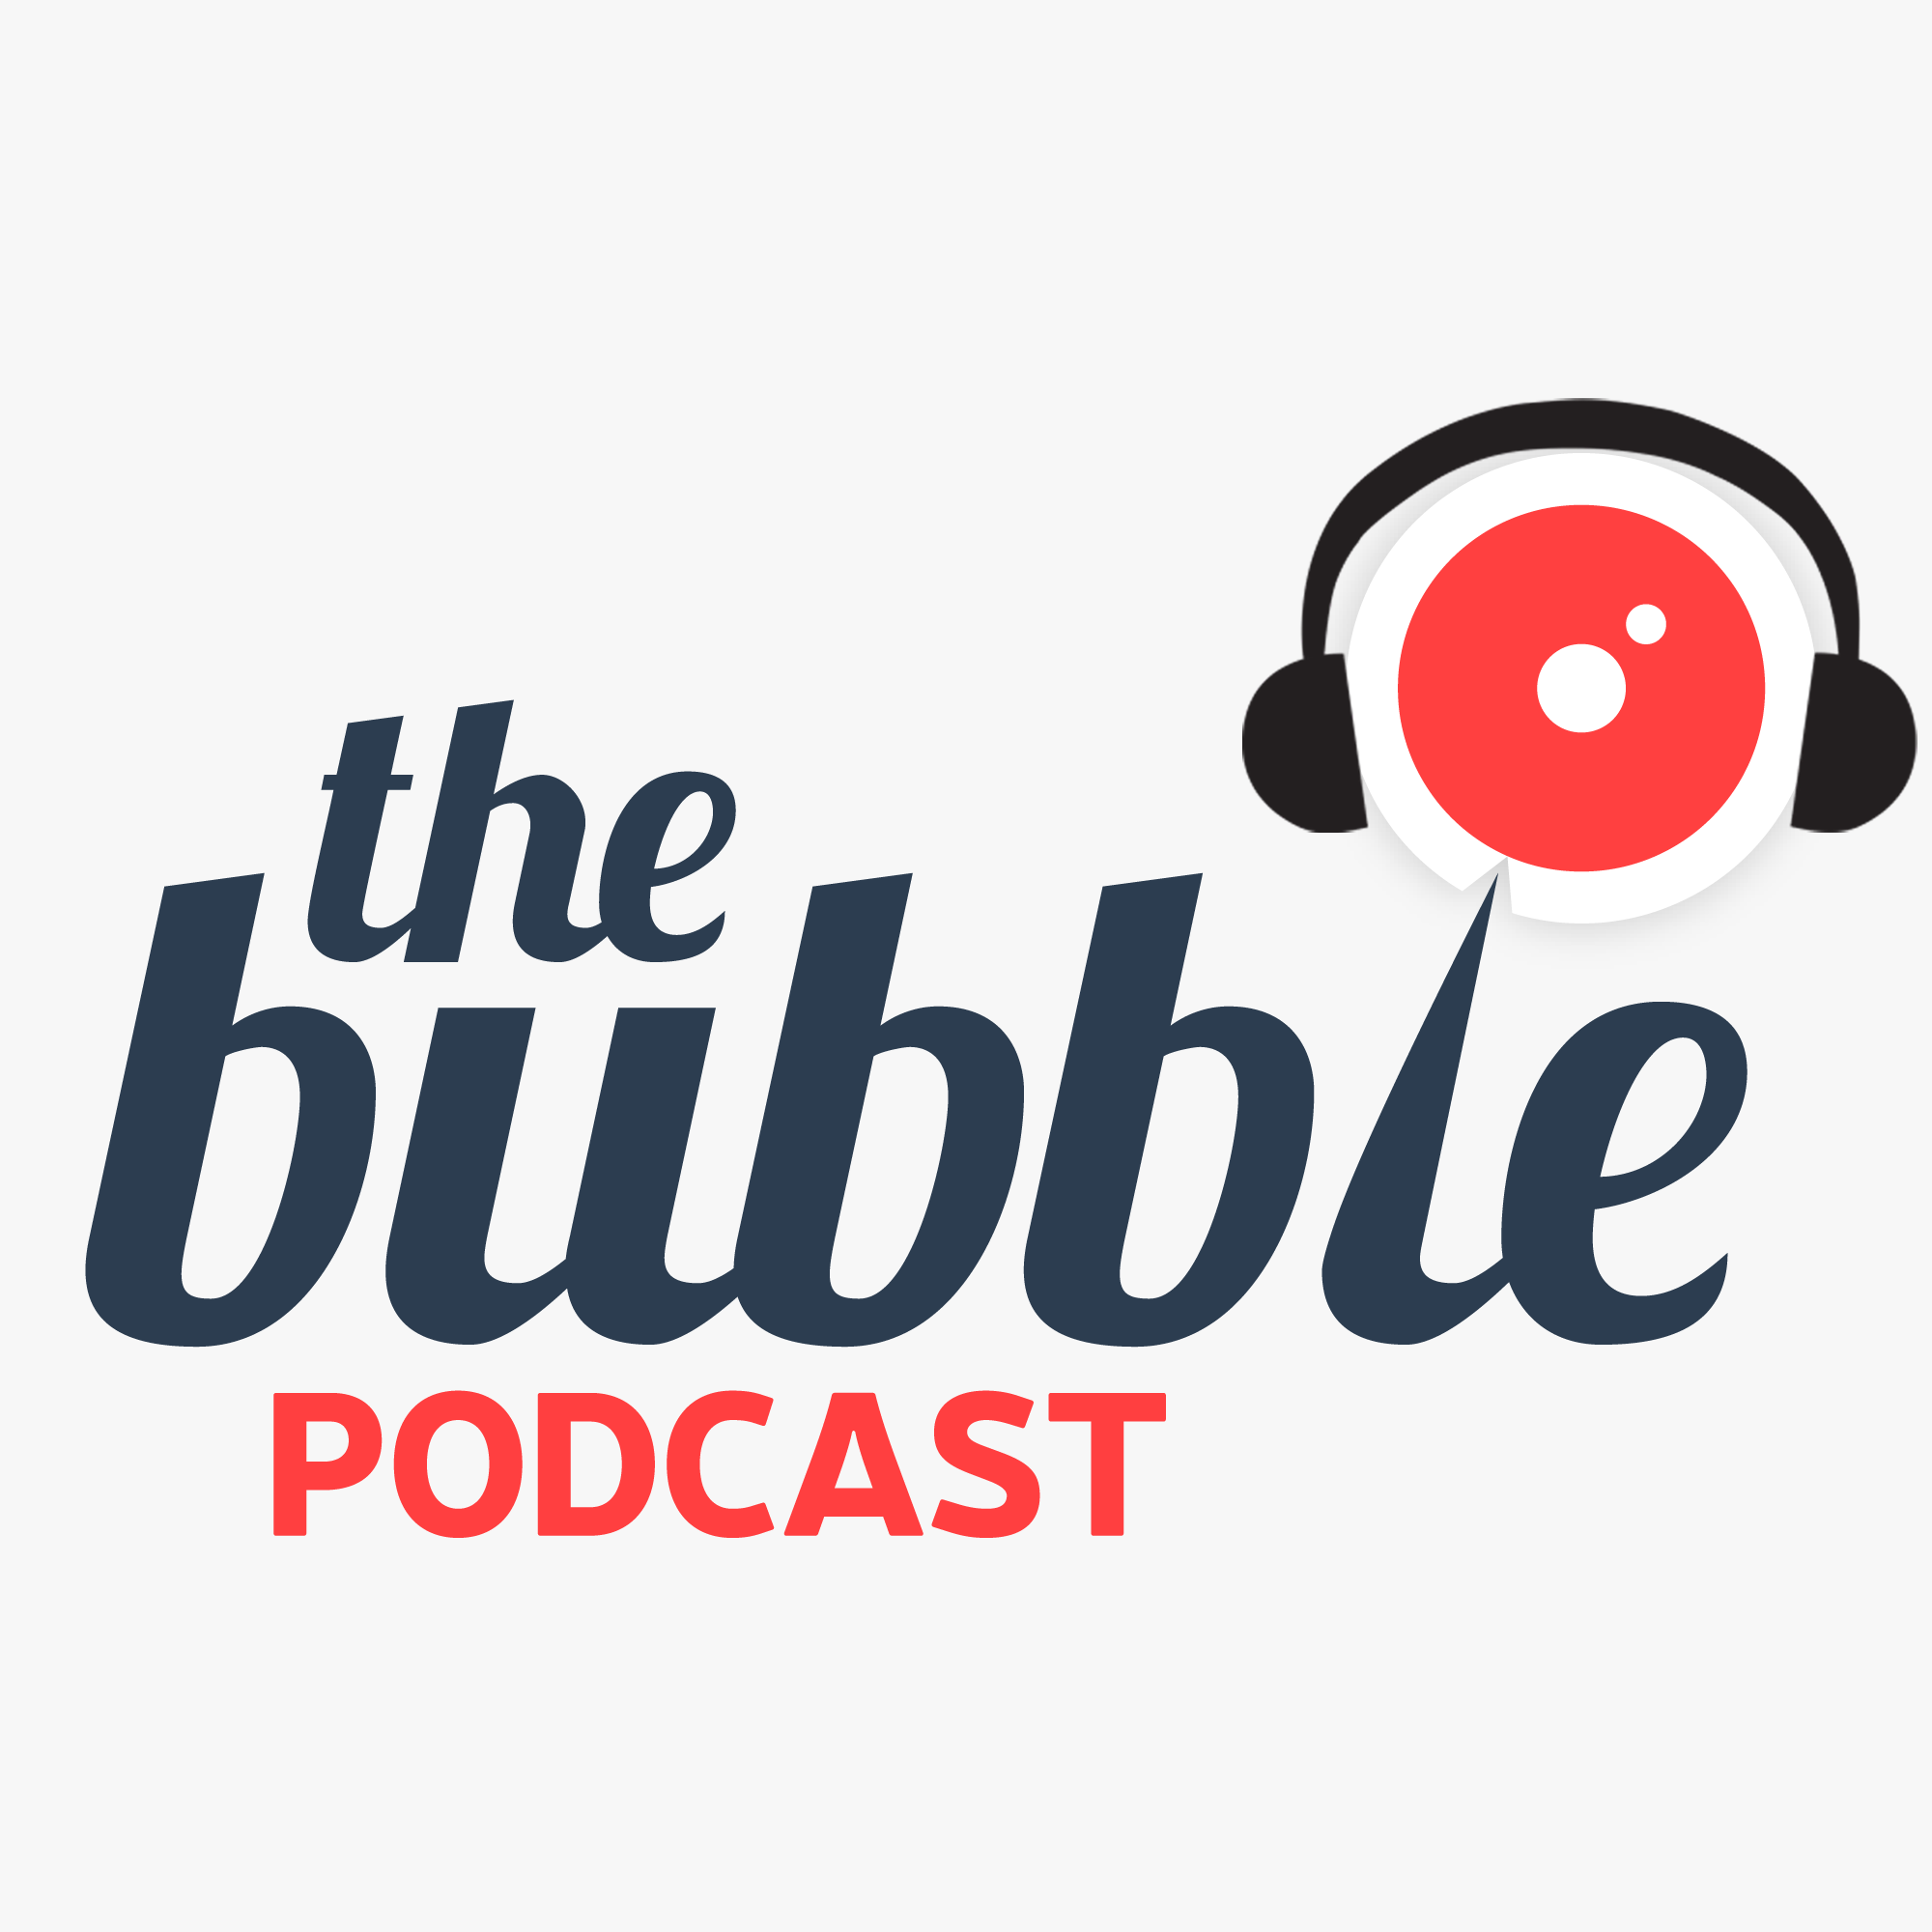 #Podcast The Bubble | 22.05: The news. With a twist.